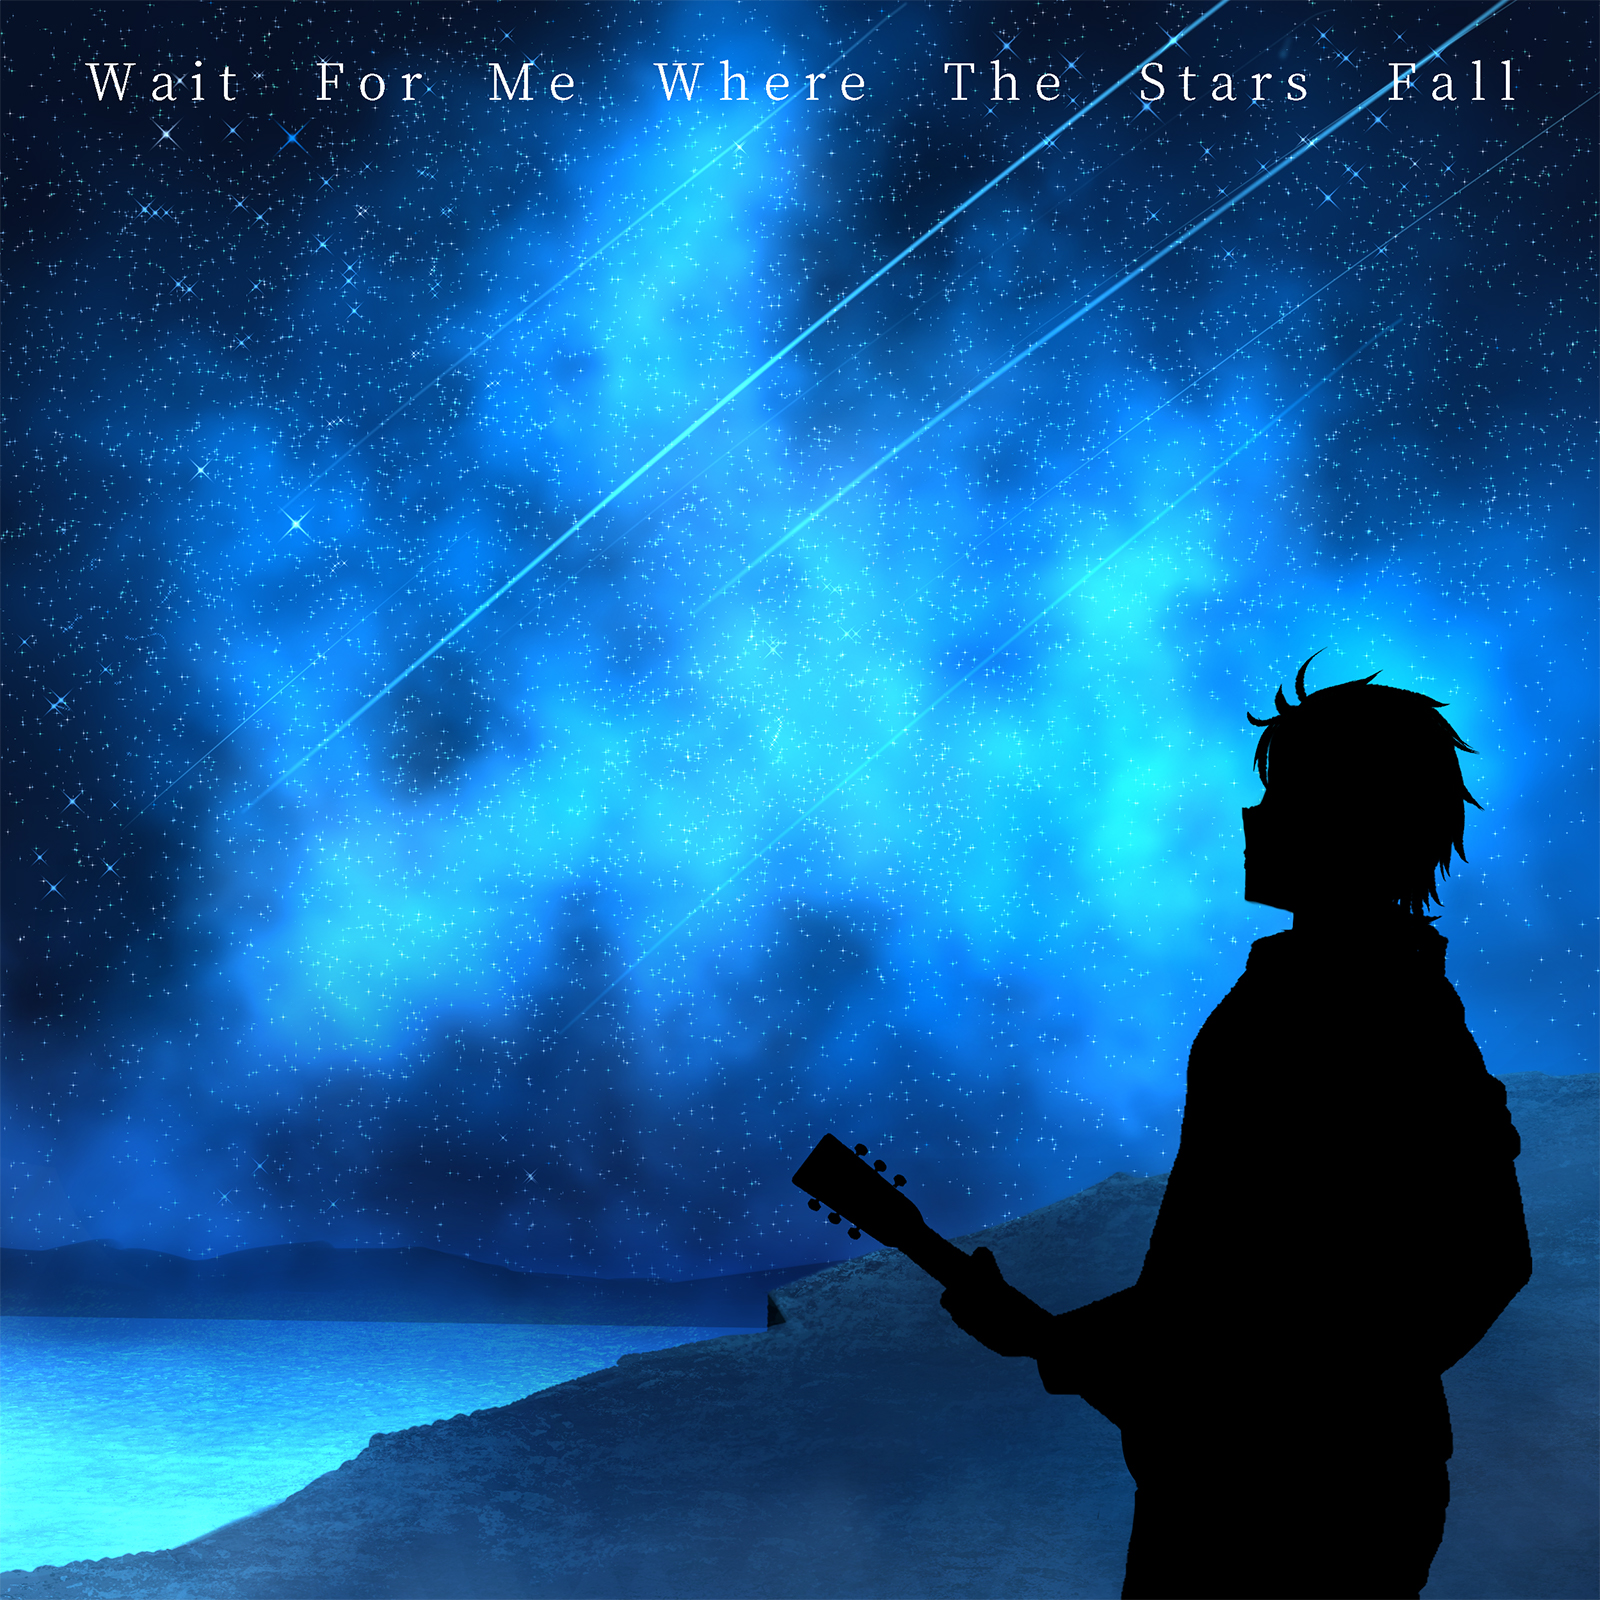 Wait For Me Where The Stars Fall